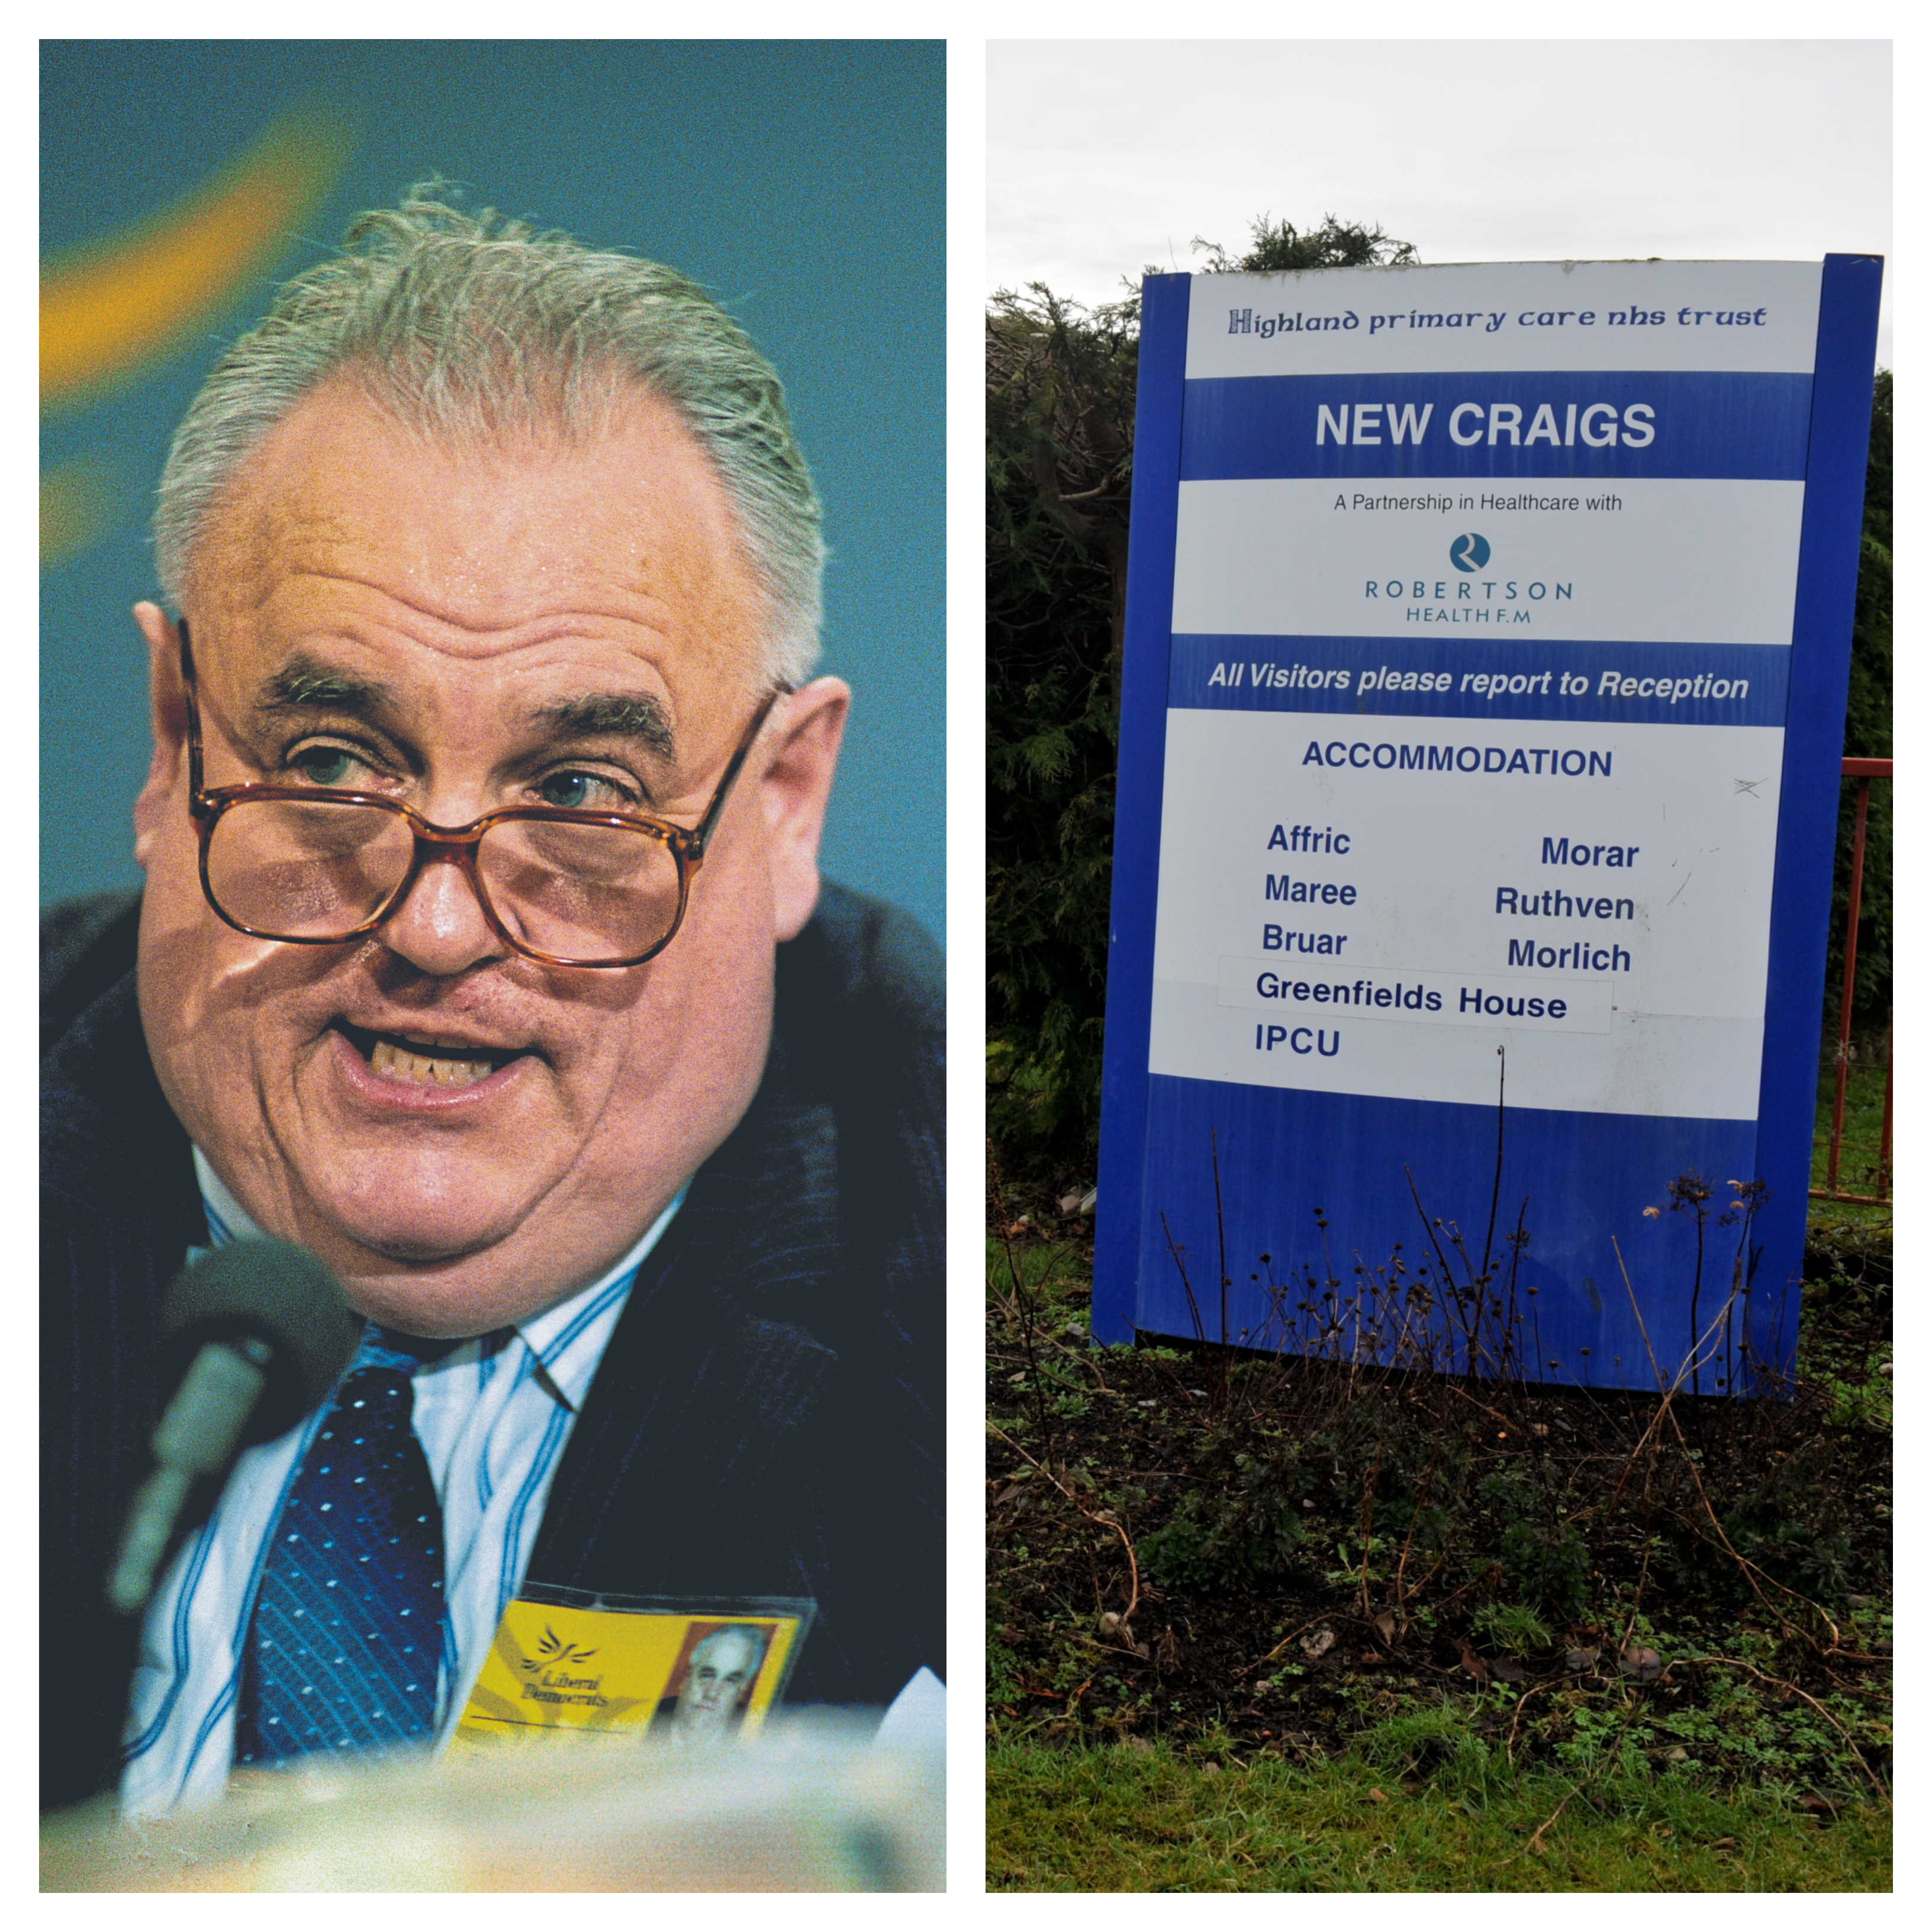 Cyril Smith, left, and New Craigs Hospital in Inverness.